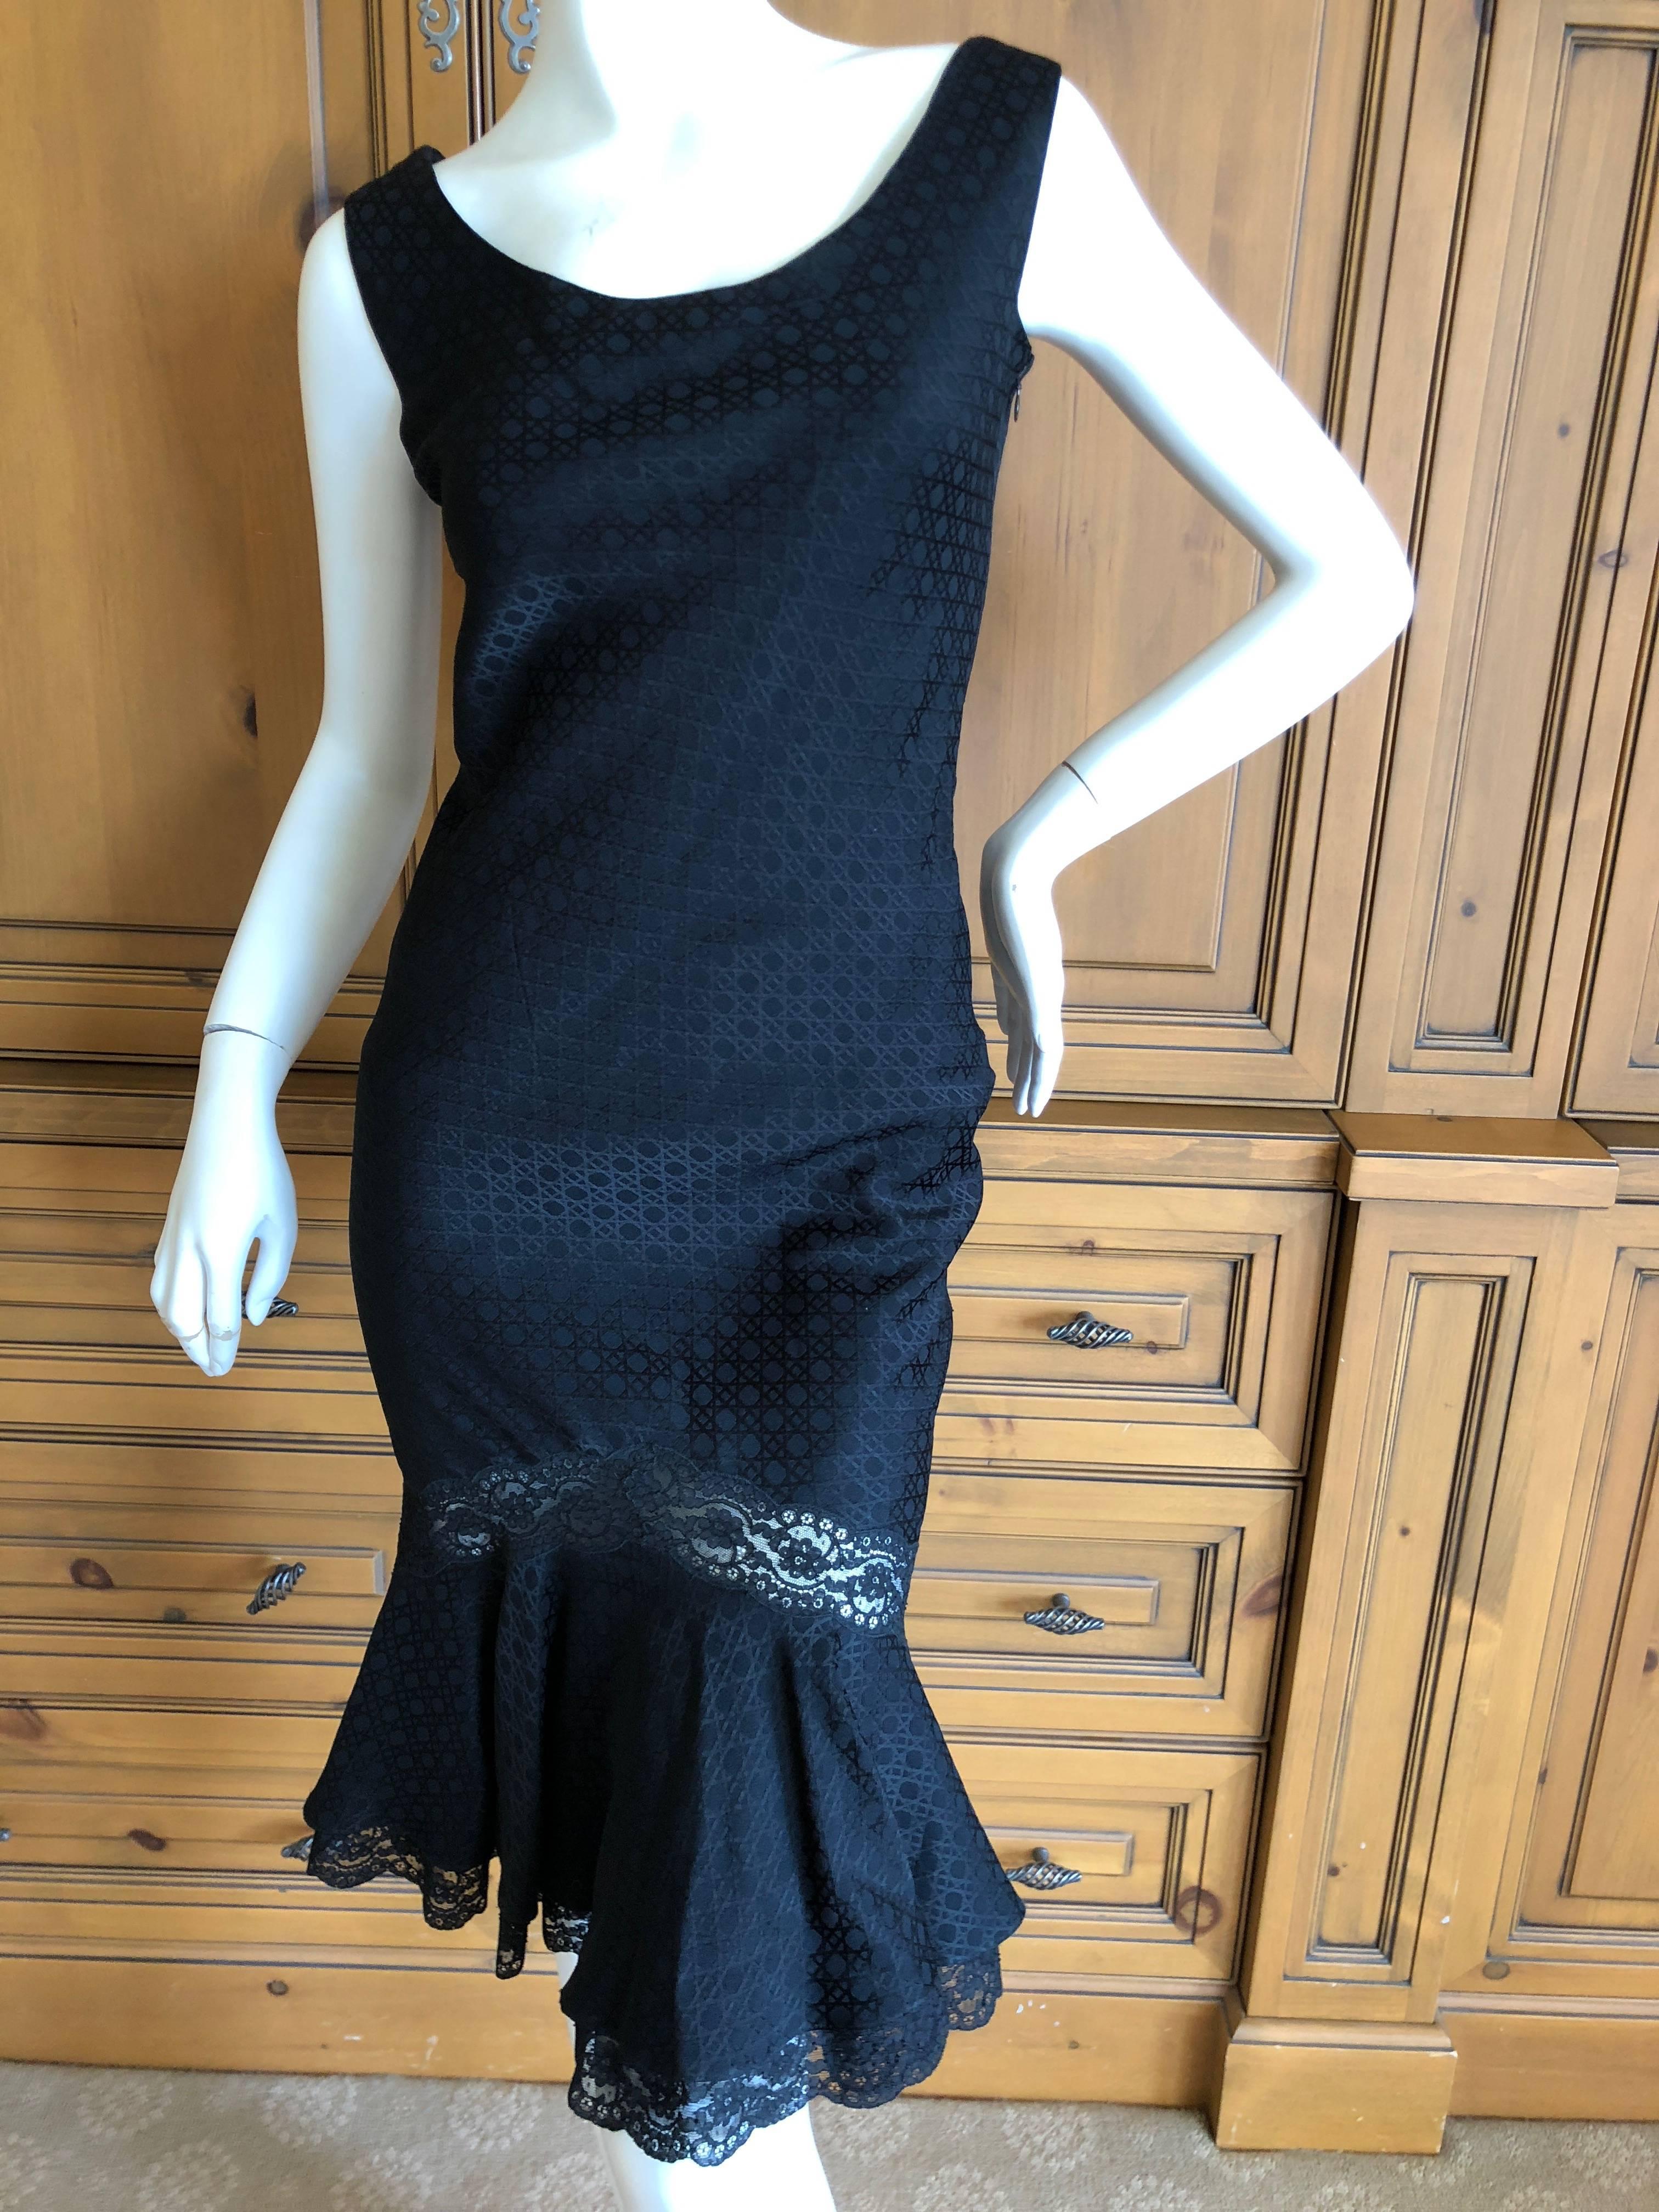 Christian Dior by John Galliano Black Cannage Pattern Silk Lace Trim Dress .
Cut on a bias, there is room in the measurements, it will stretch.
The Cannage pattern , a Dior signature is very subtle , black on black and very chic.
I have never seen